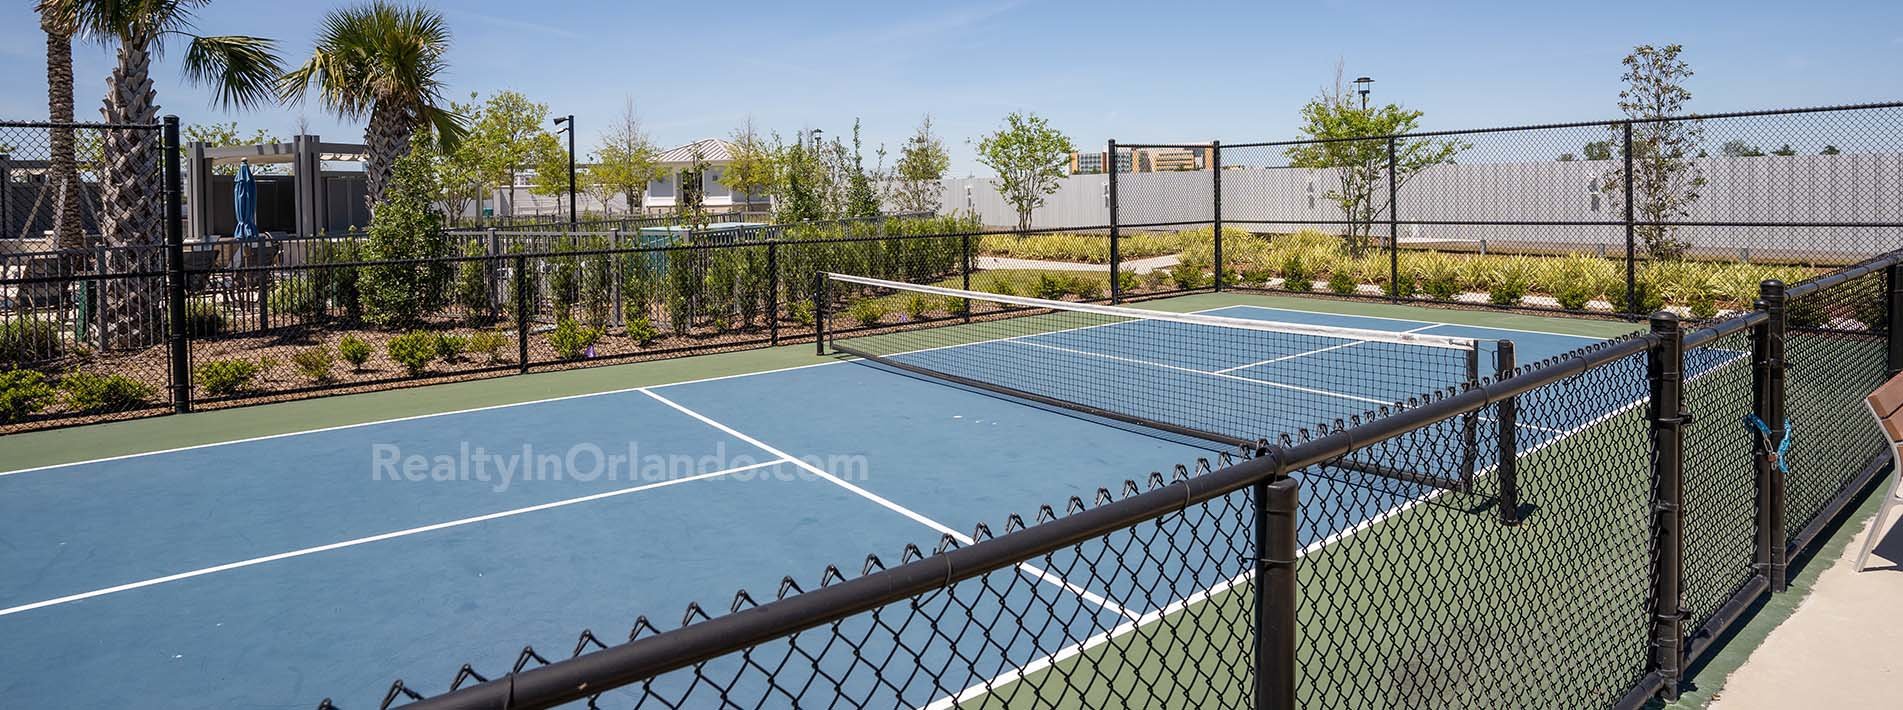 Gatherings of Lake Nona - 55+ Active Adult Community - Tennis Courts